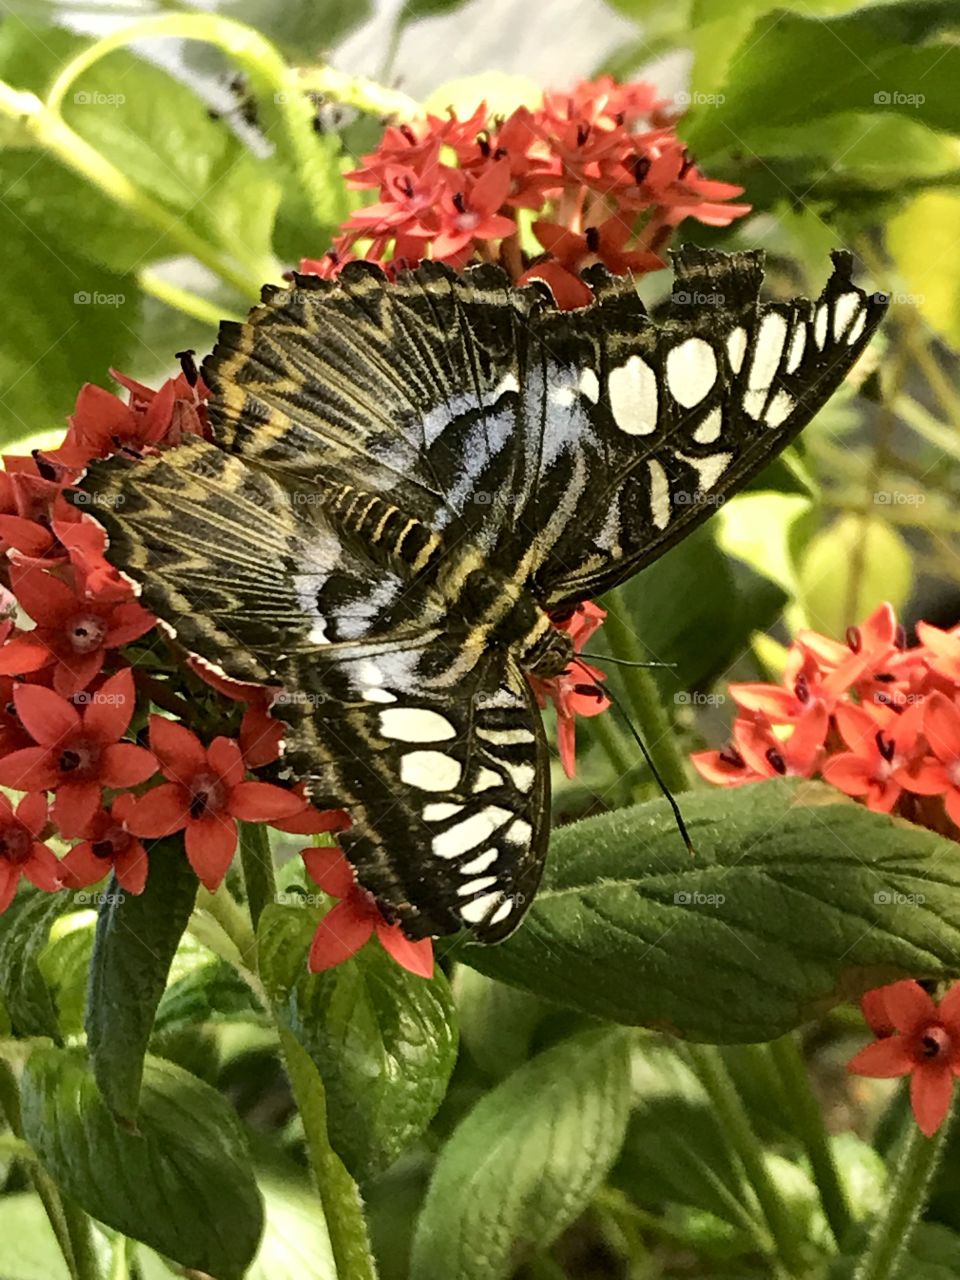 I love butterflies! I was struck by the beauty of the black and white wings set against the red flowers in this butterfly garden.